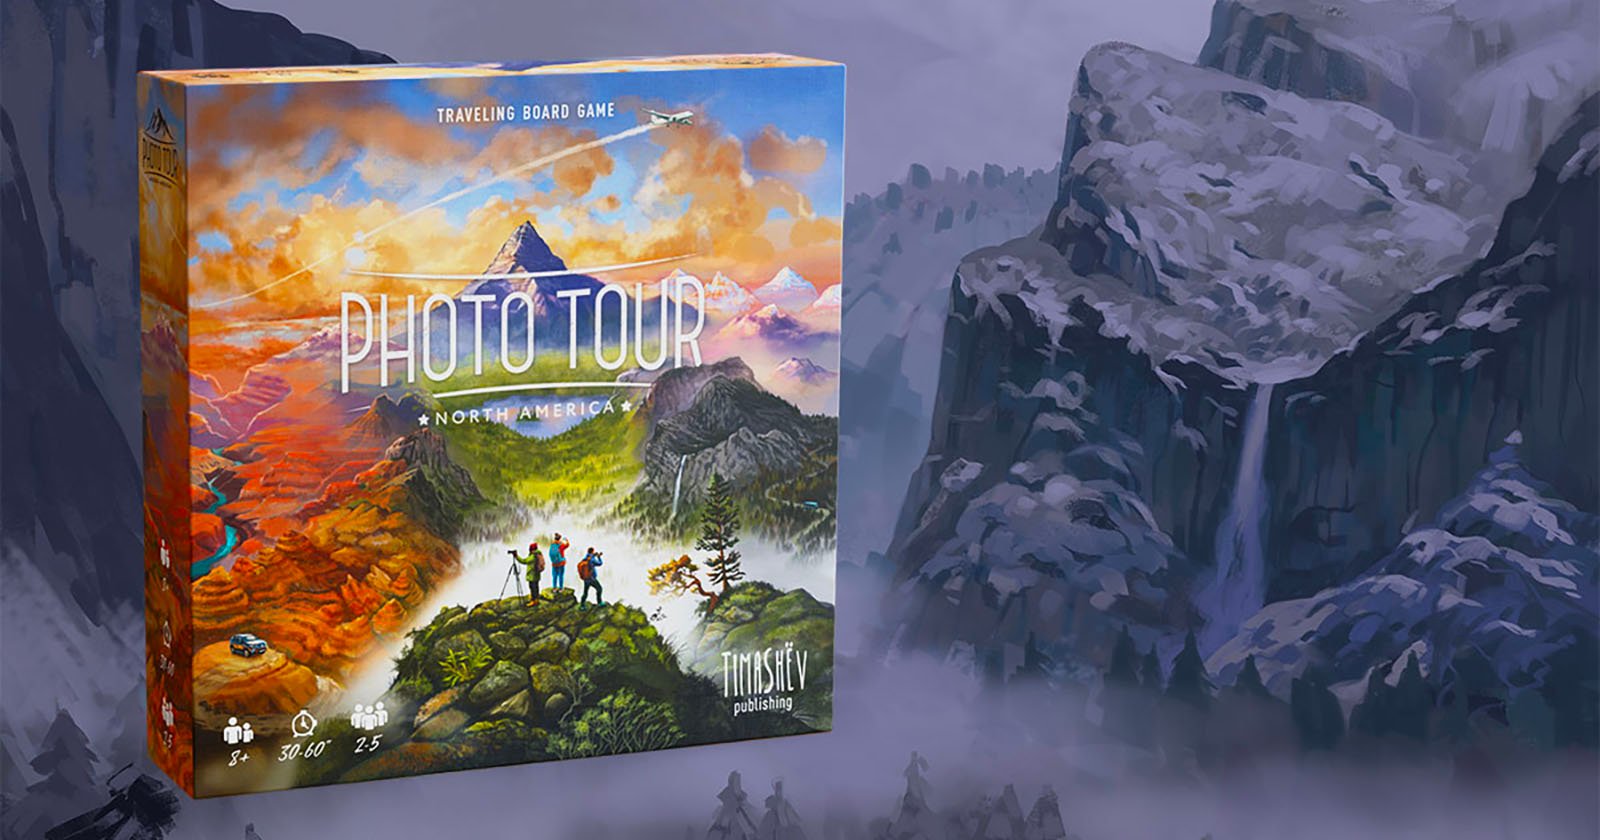 Photo Tour is an Upcoming Travel Photography-Themed Board Game